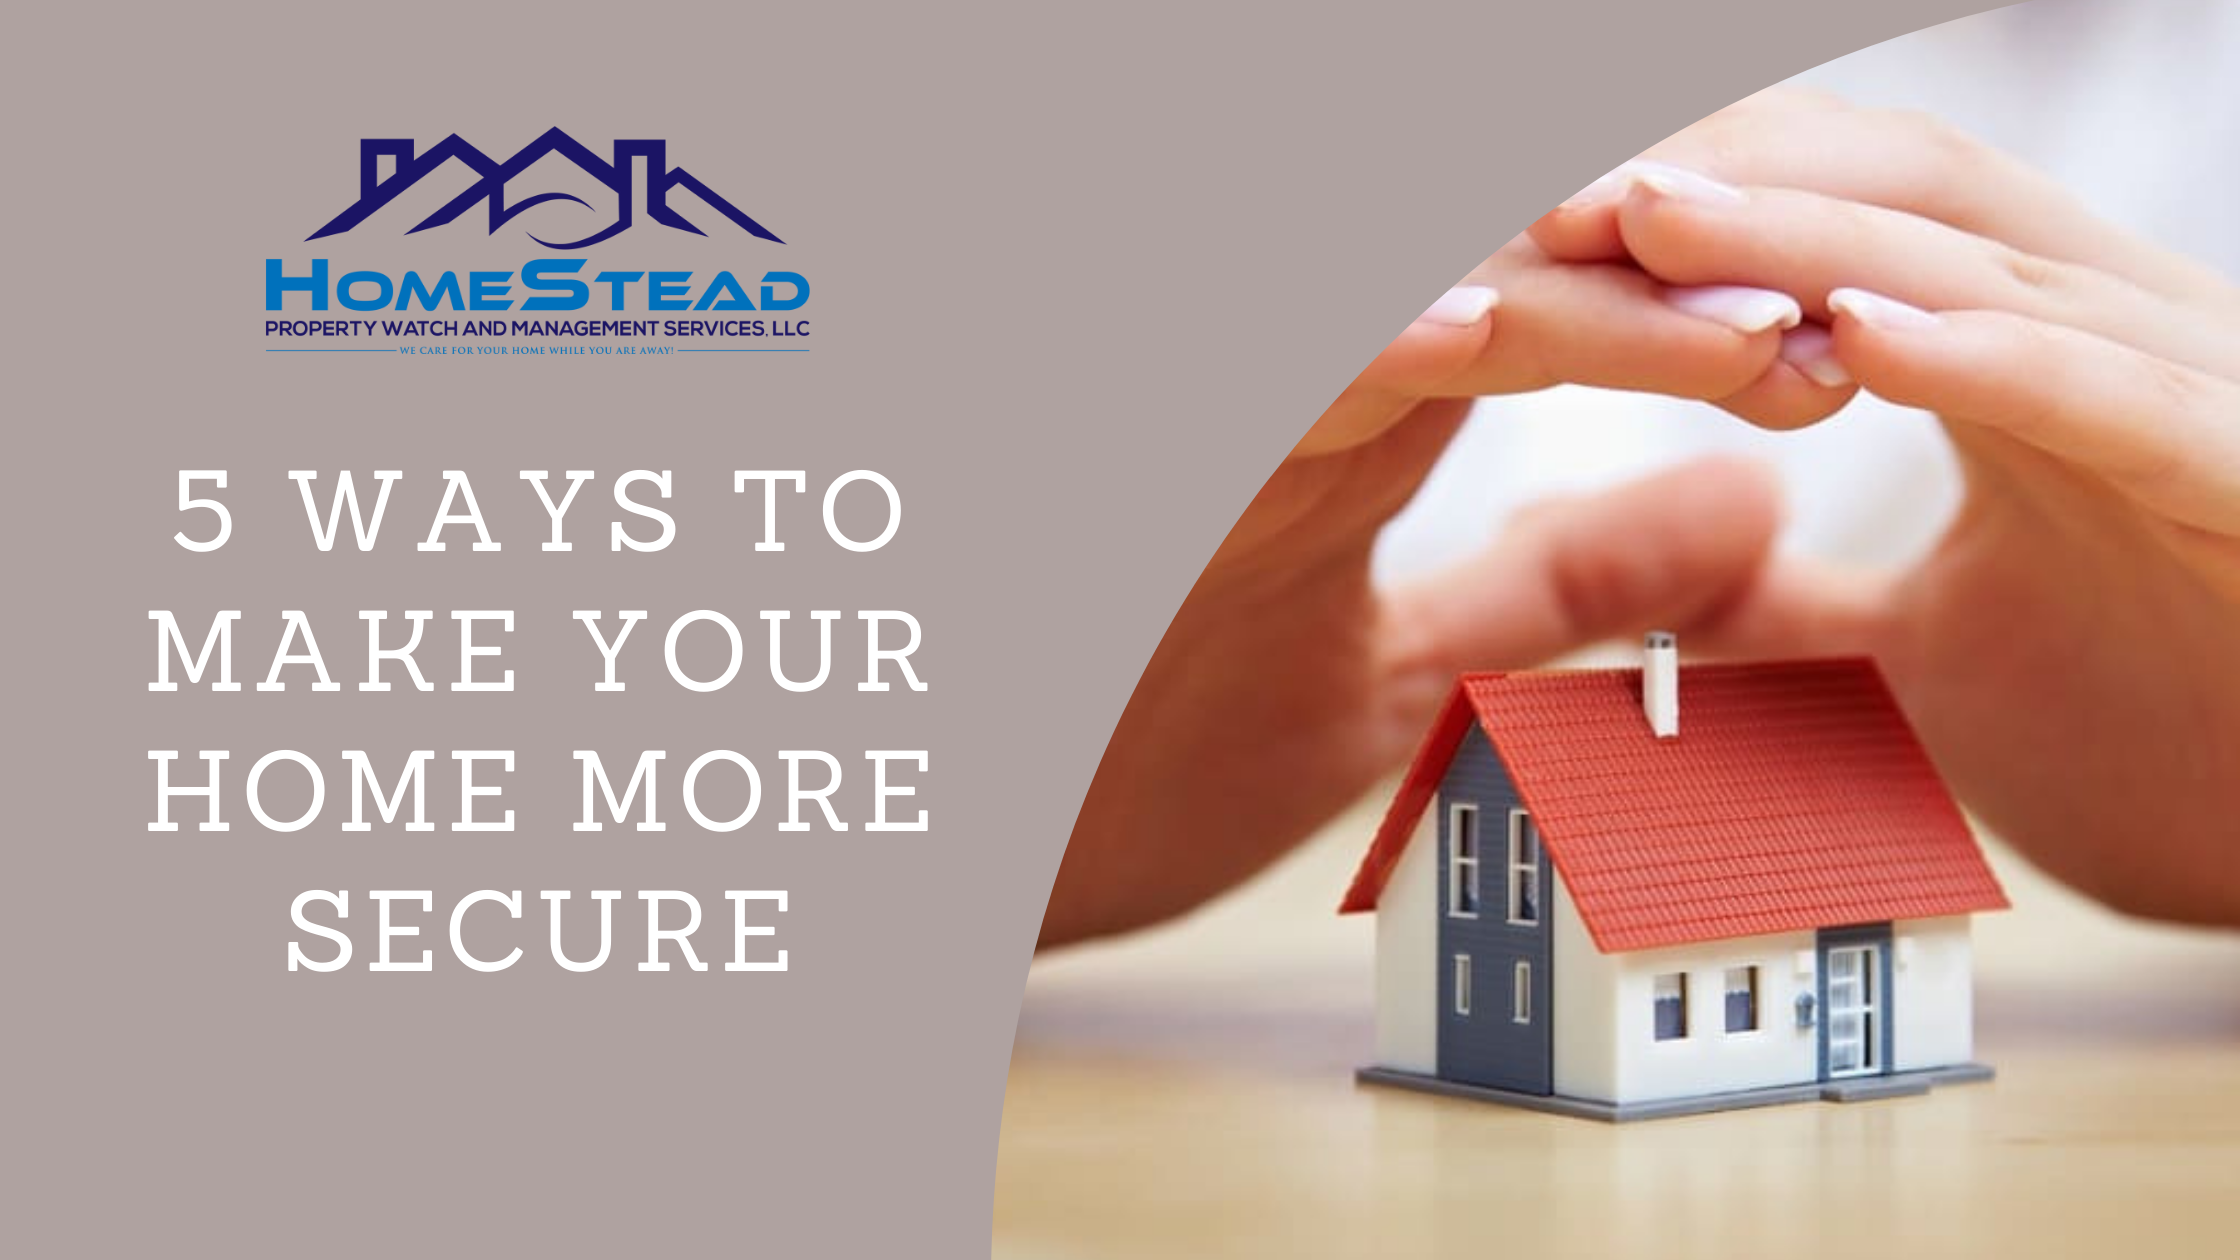 5 Ways to Make Your Home More Secure